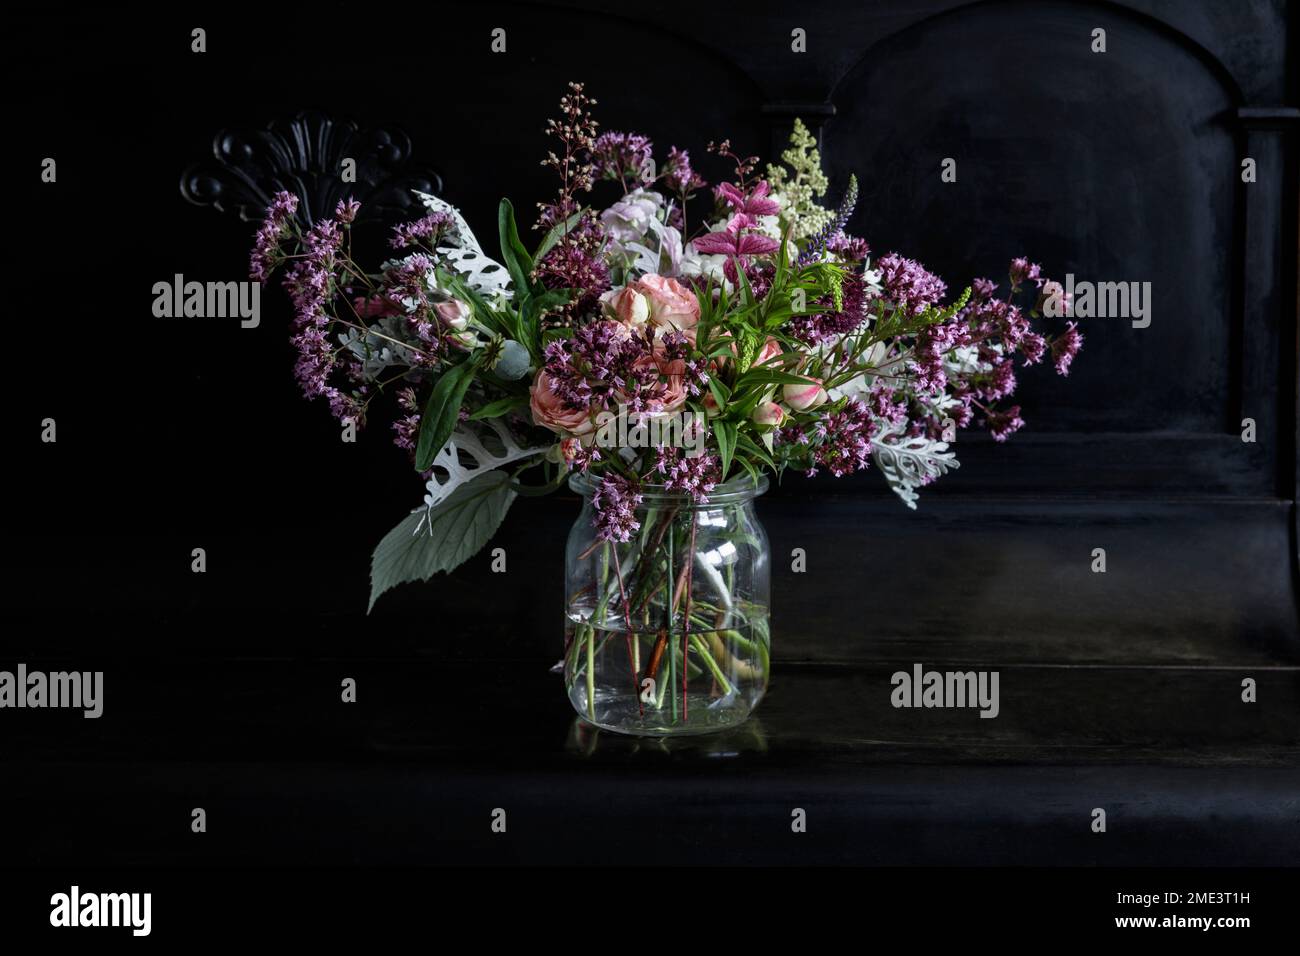 Bunch of flowers in glass jar on black piano Stock Photo